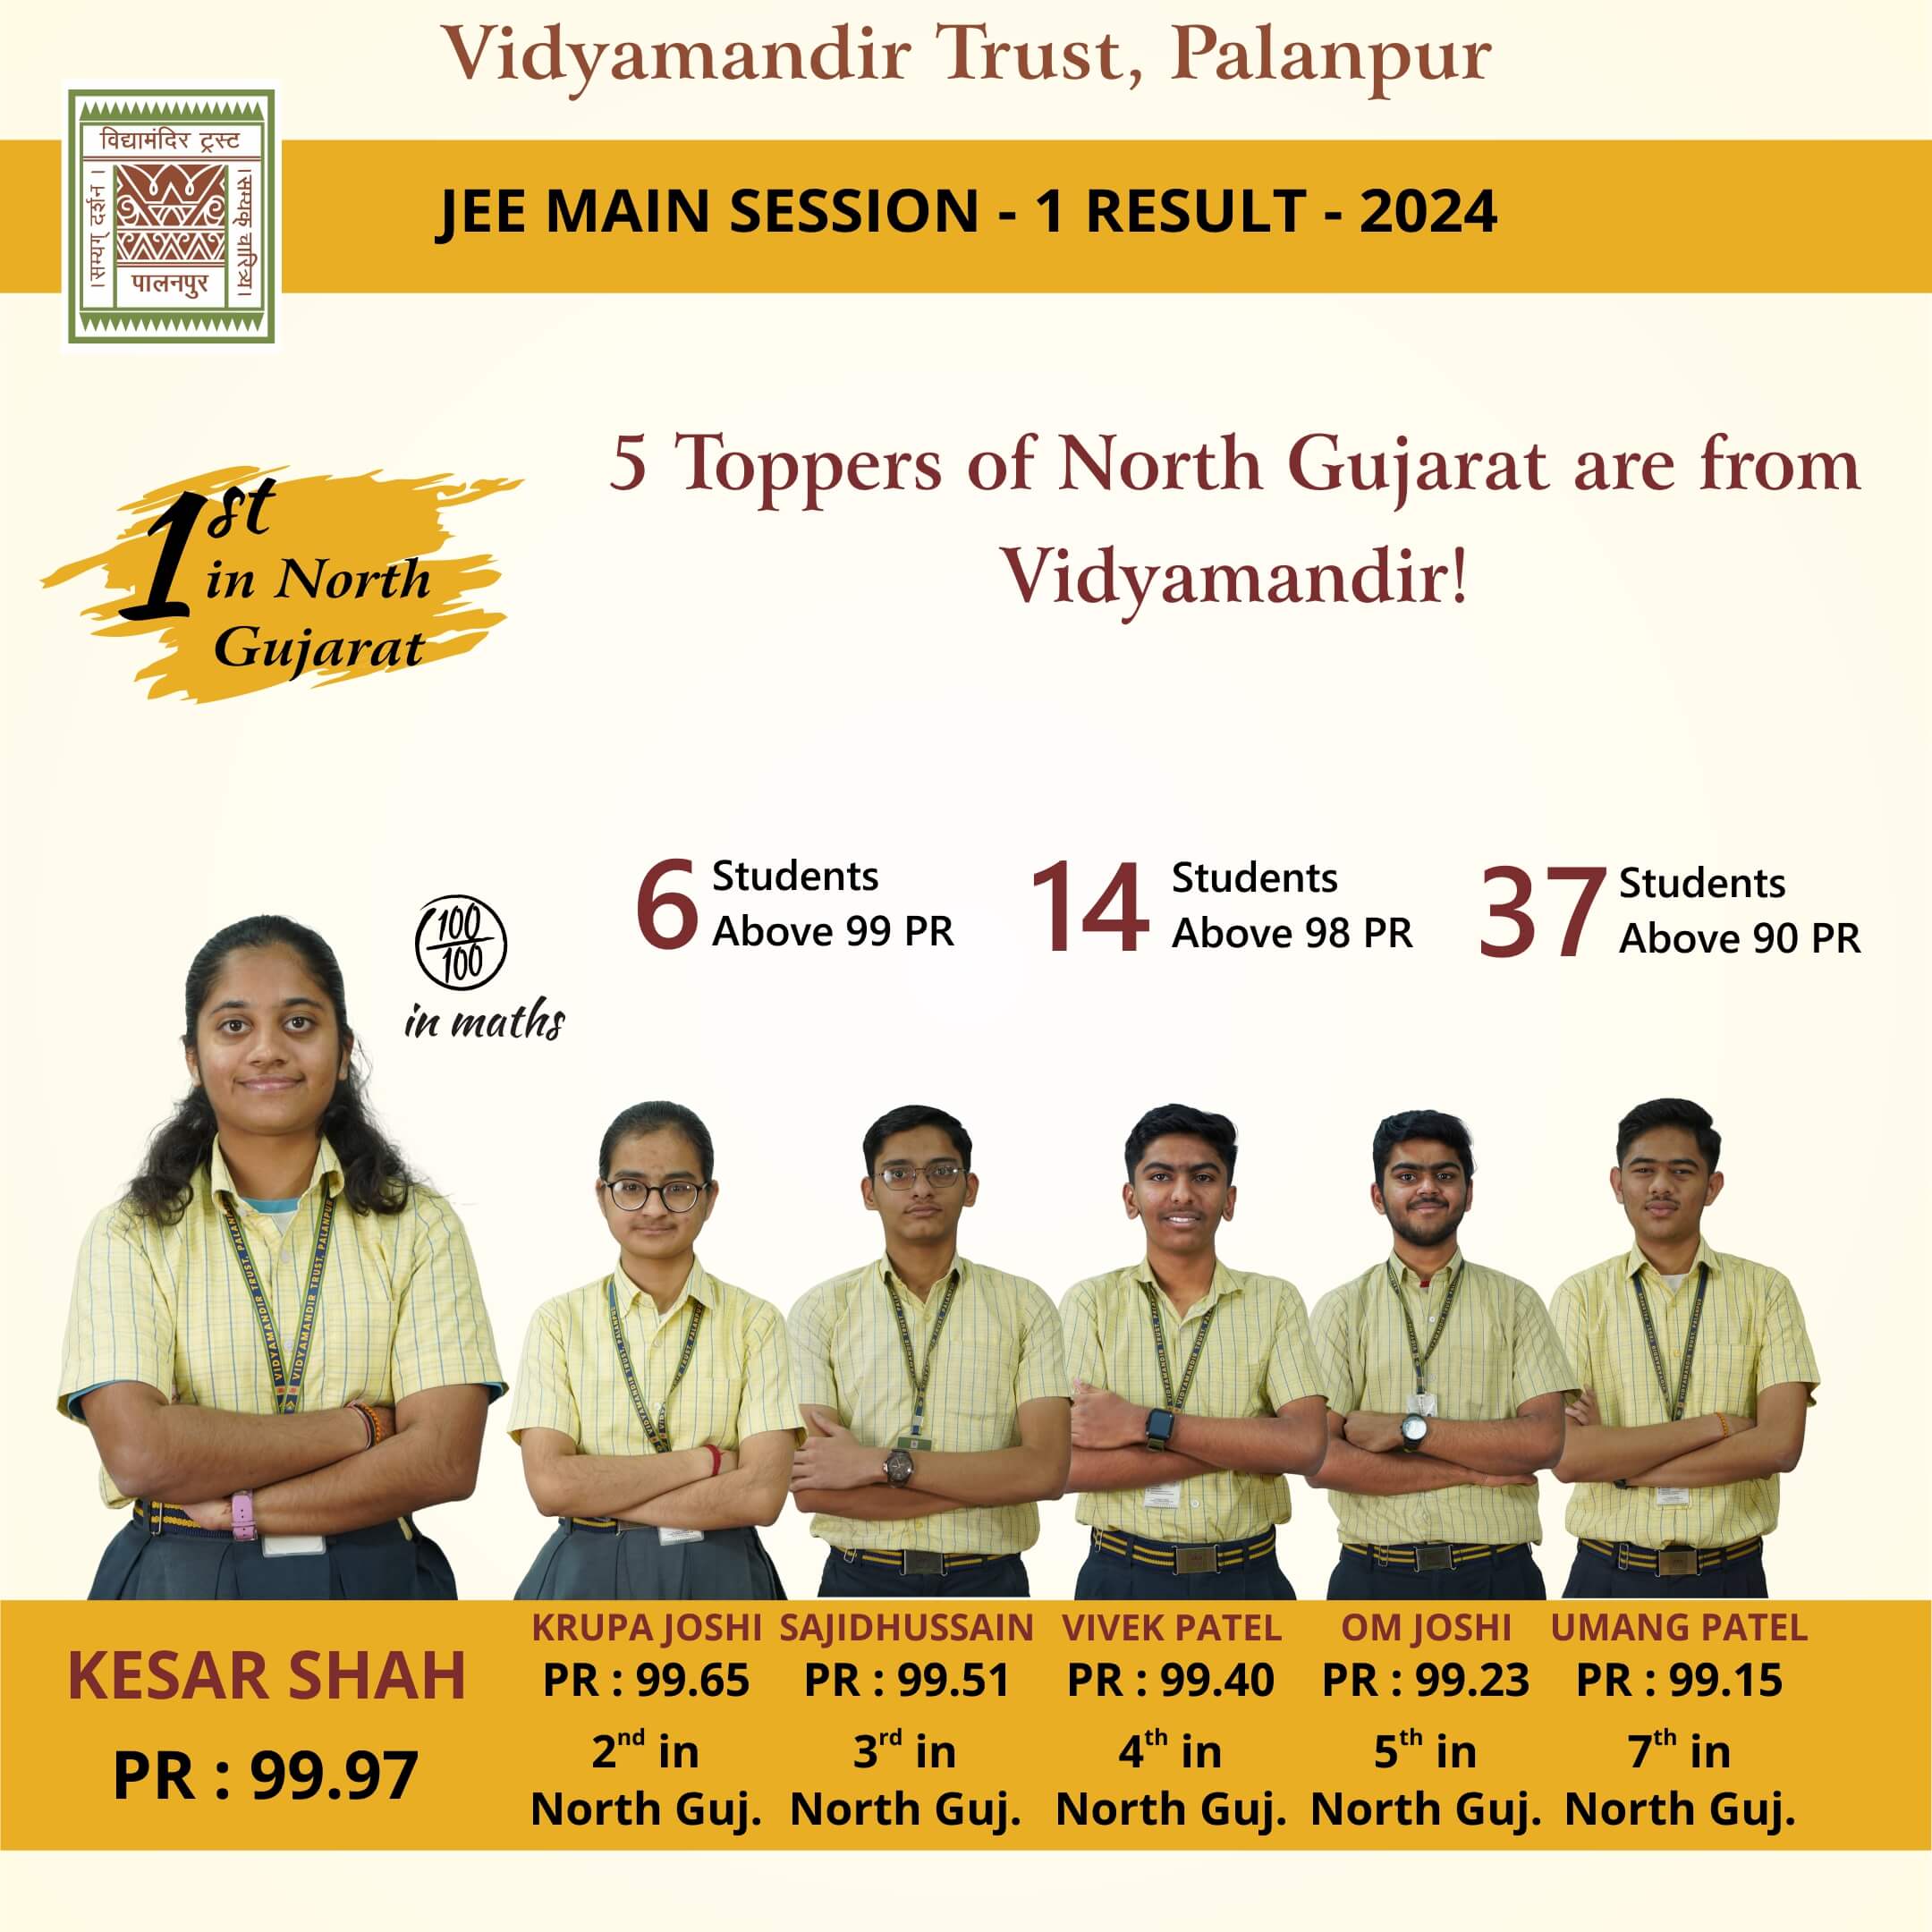 Vidyamandir Trust Palanpur, Admission Banner, Brochure for 11th Arts, commerce & Science Admission 2024, )